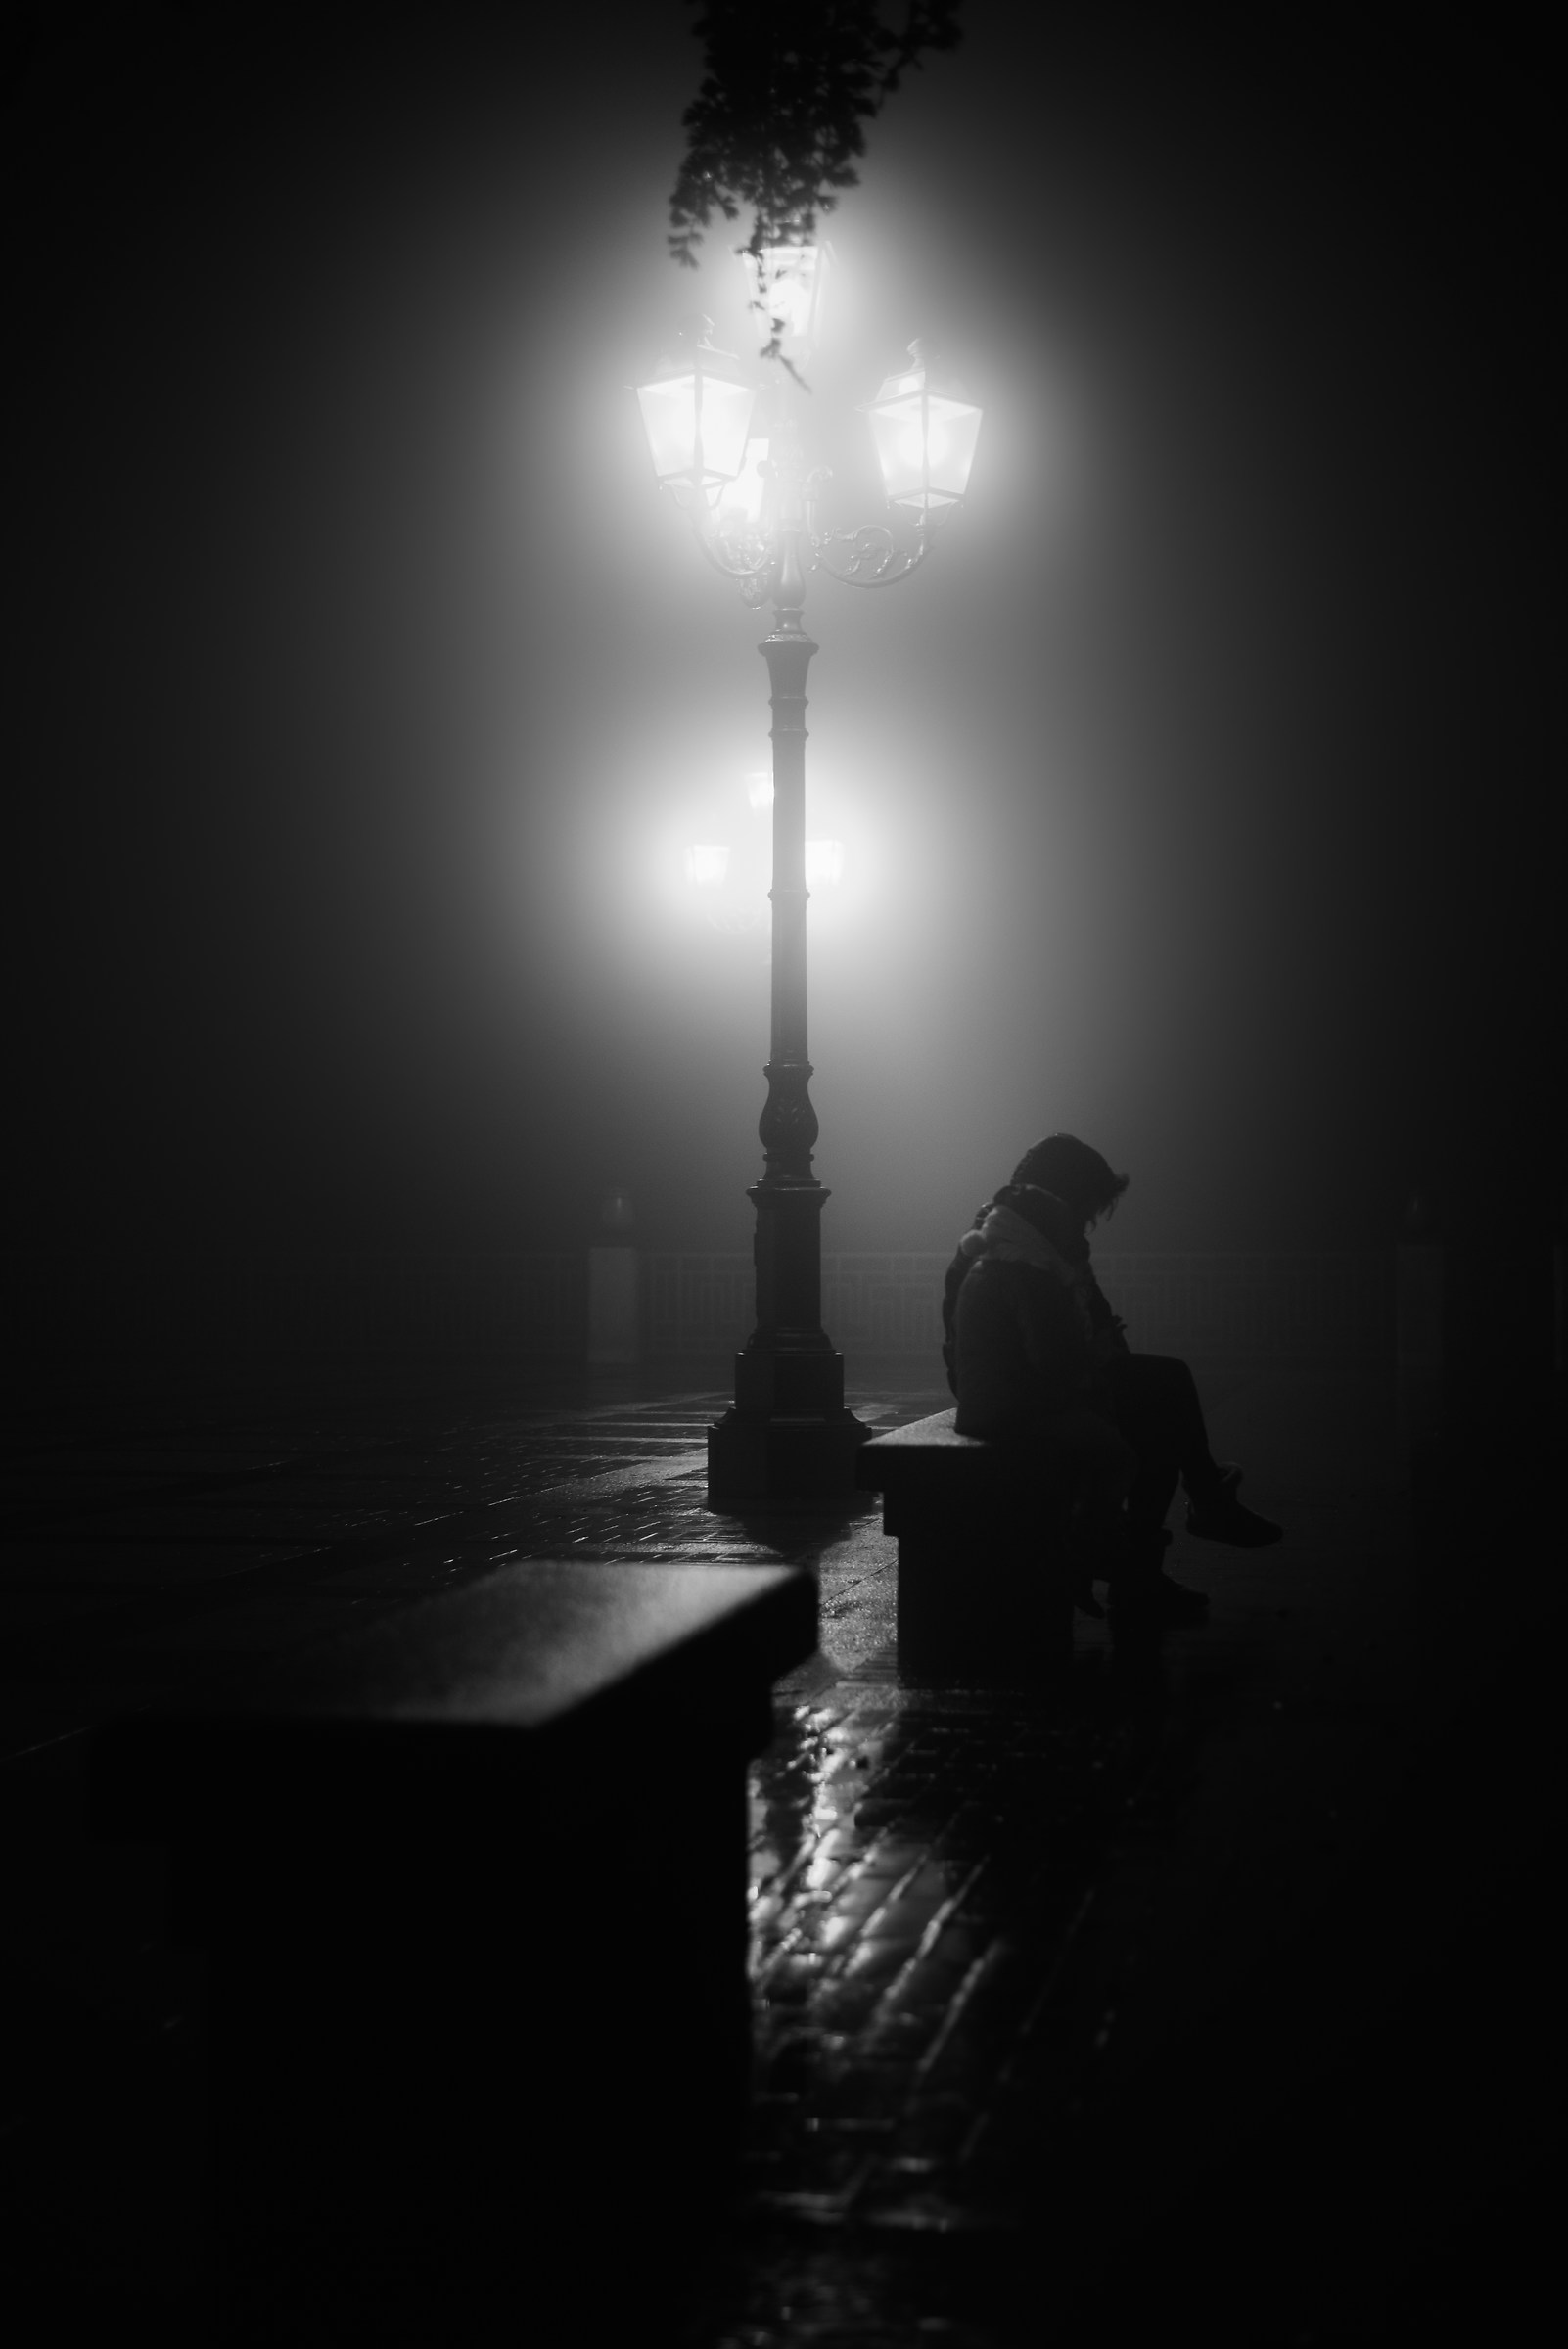 Thoughts suspended in the fog...